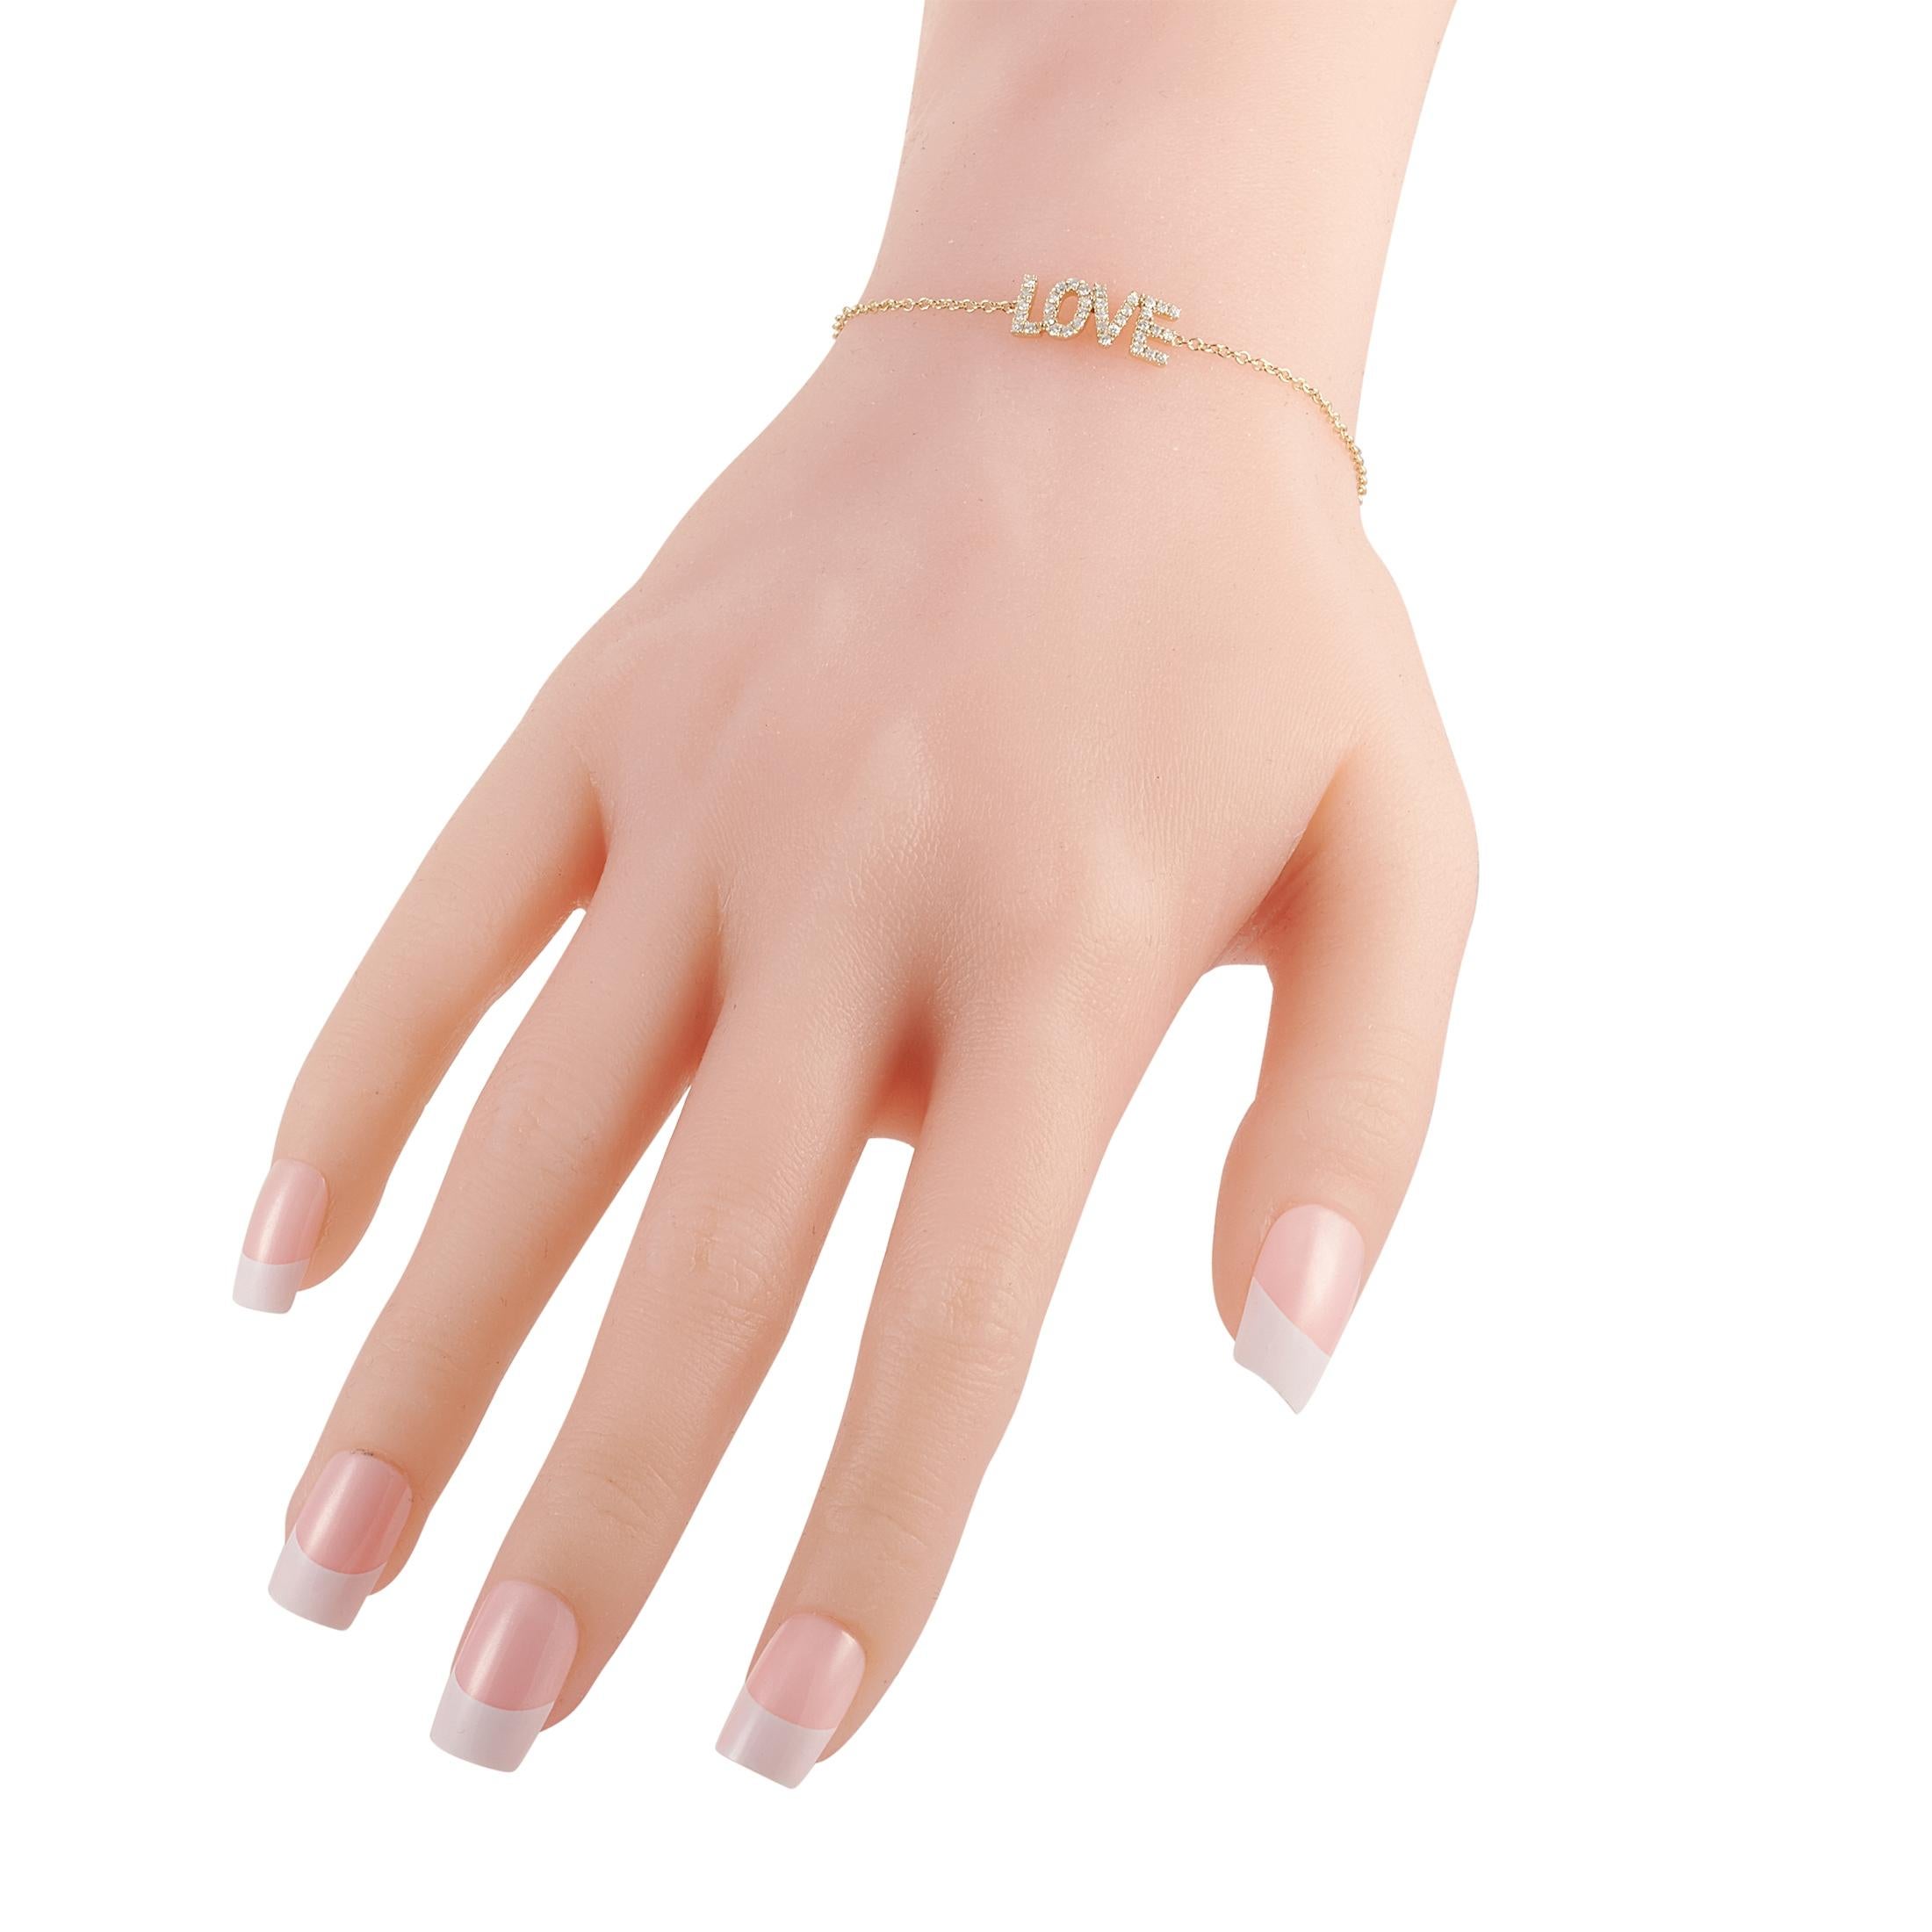 This LB Exclusive love bracelet is made of 14K yellow gold and embellished with diamonds that amount to 0.30 carats. The bracelet weighs 2 grams and measures 6.50” in length.
 
 Offered in brand new condition, this jewelry piece includes a gift